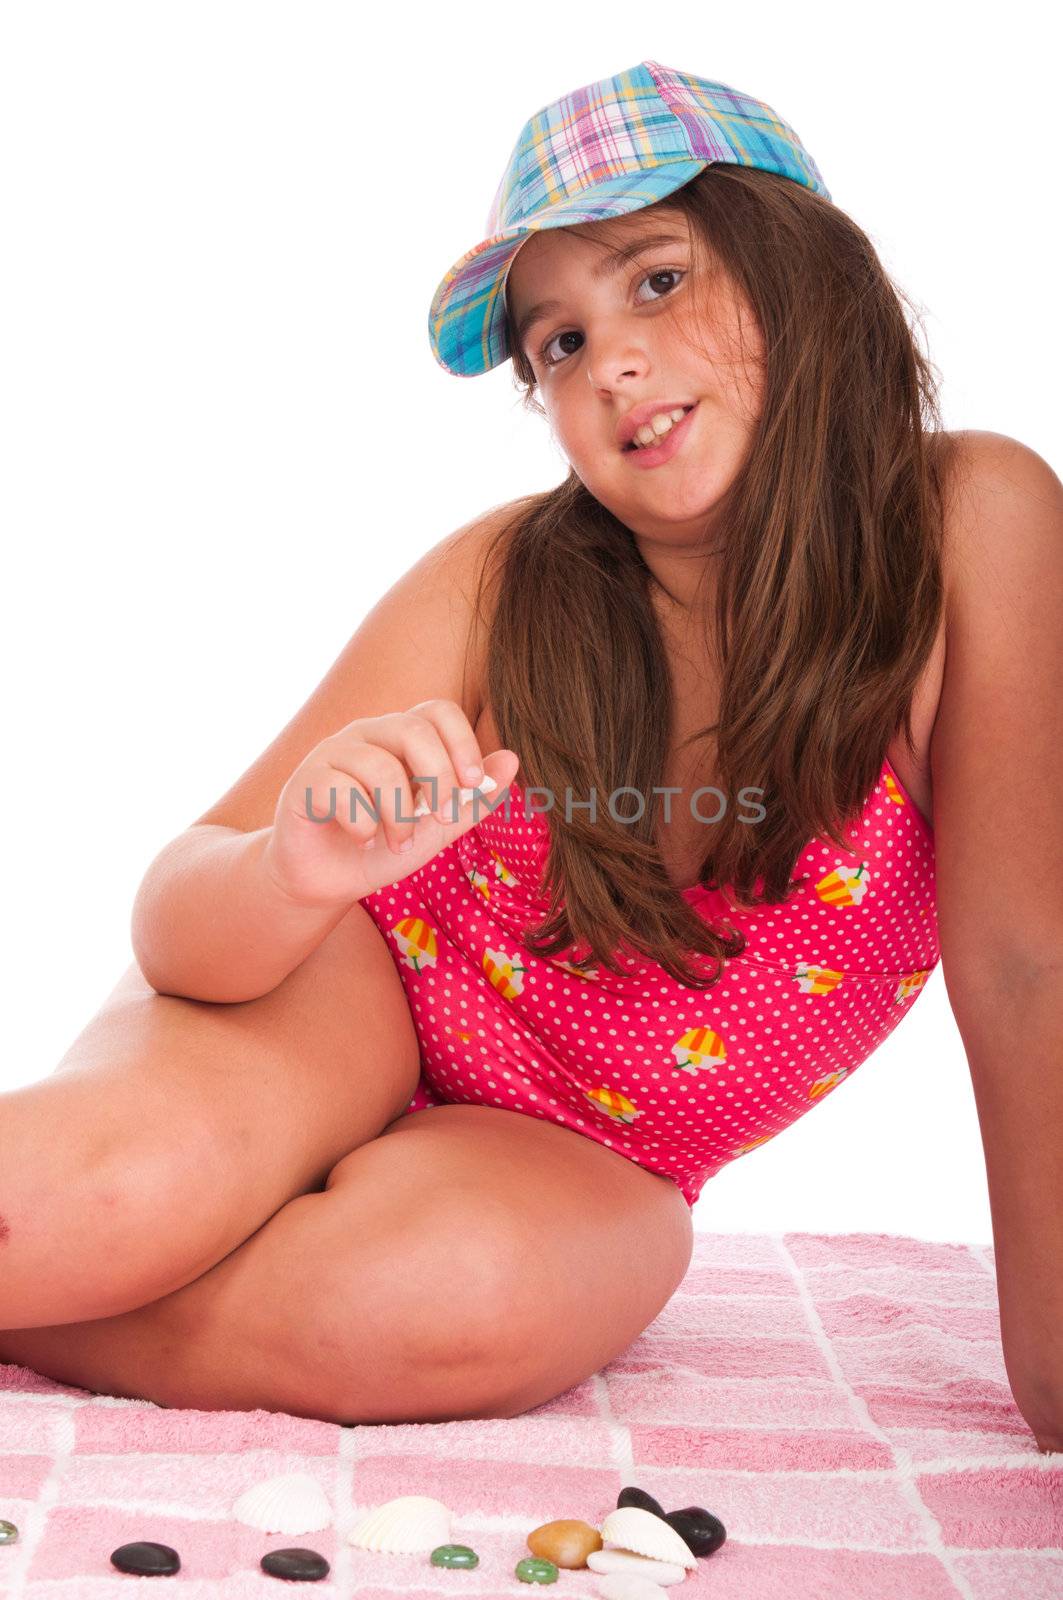 beautiful brunette teenage girl in swimsuit at the beach playing with little stones (studio setting with towel and pebbles, isolated on white background)